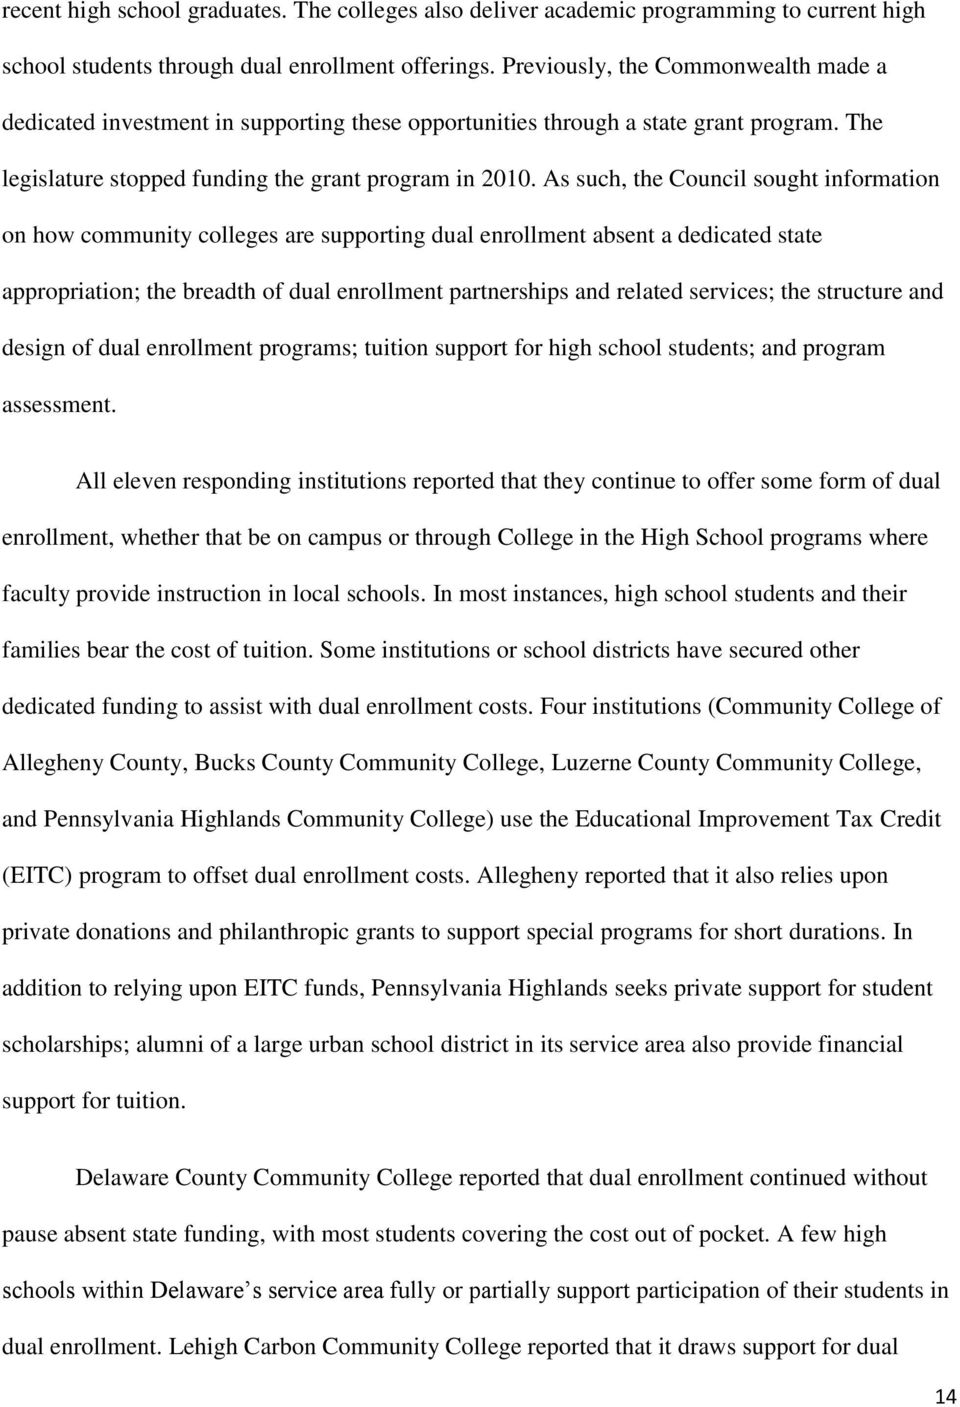 As such, the Council sought information on how community colleges are supporting dual enrollment absent a dedicated state appropriation; the breadth of dual enrollment partnerships and related